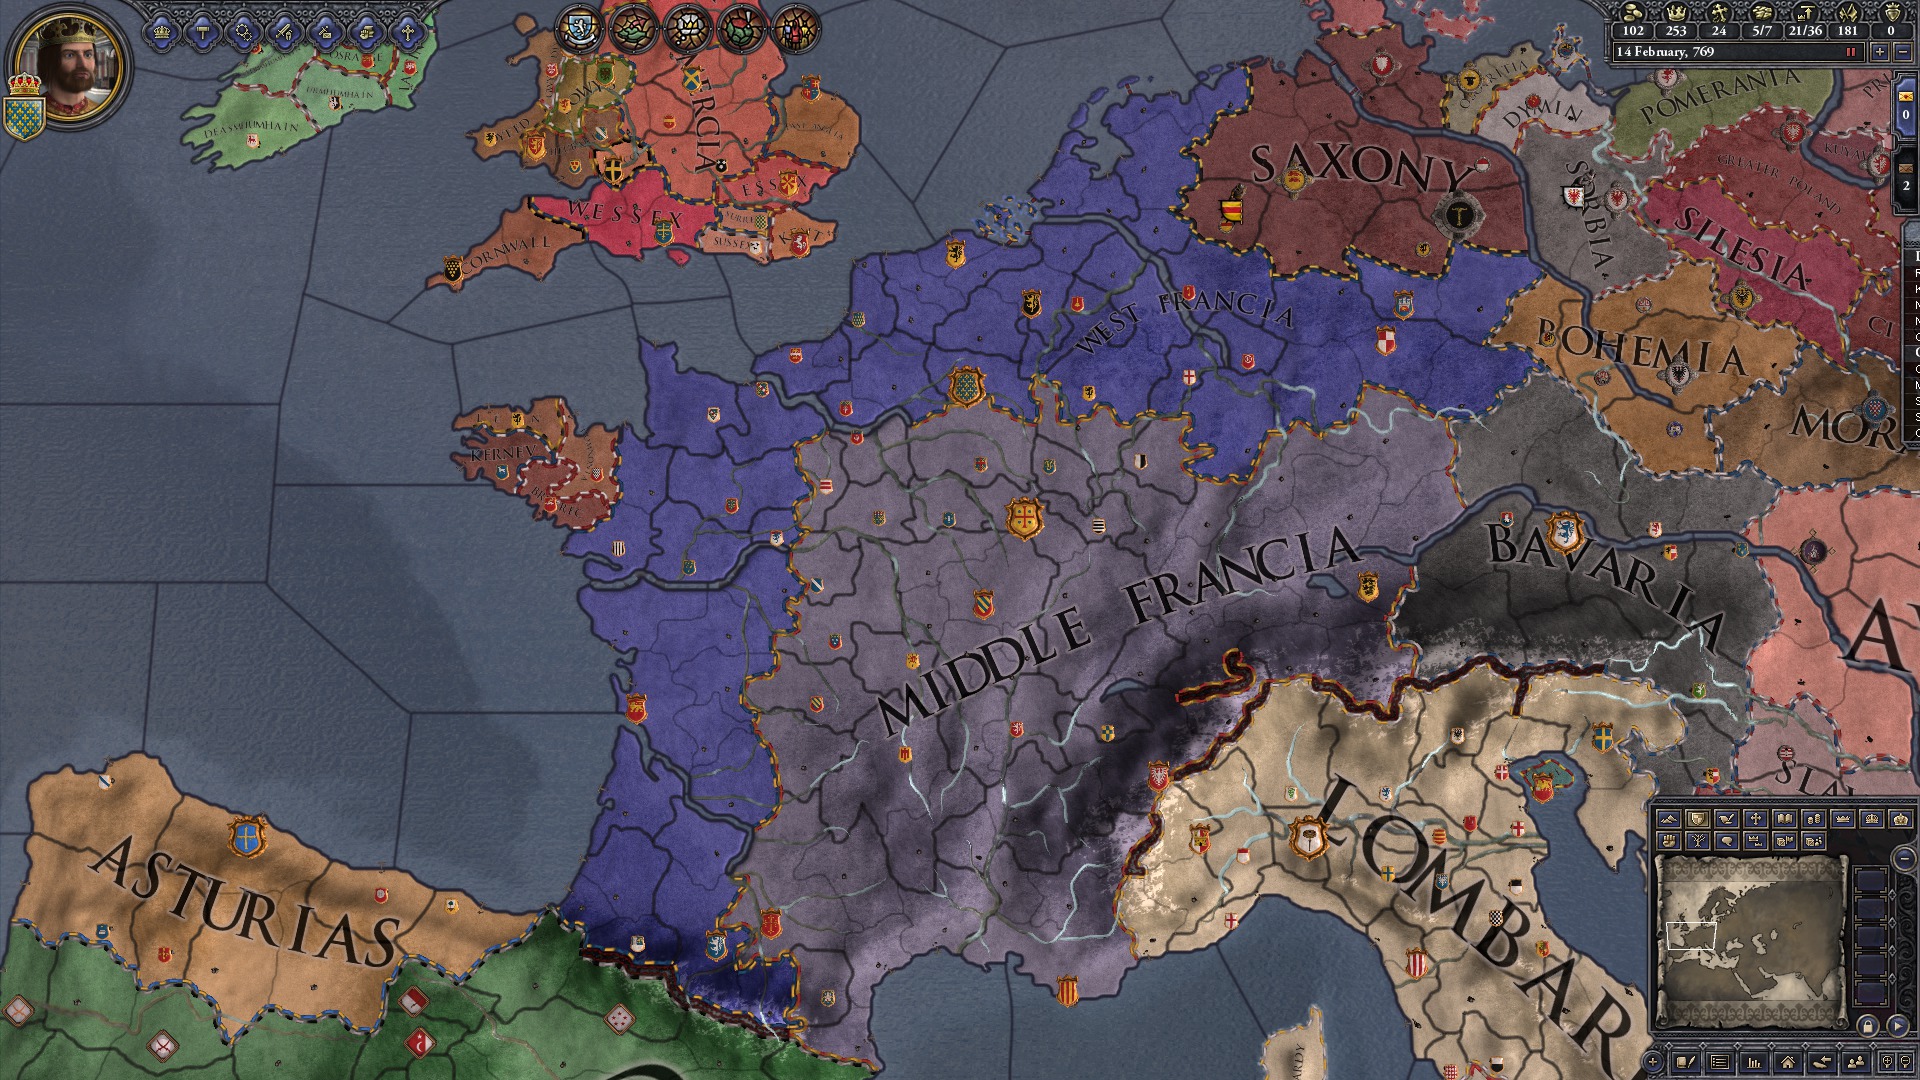 Expansion - Crusader Kings II: Charlemagne Featured Screenshot #1